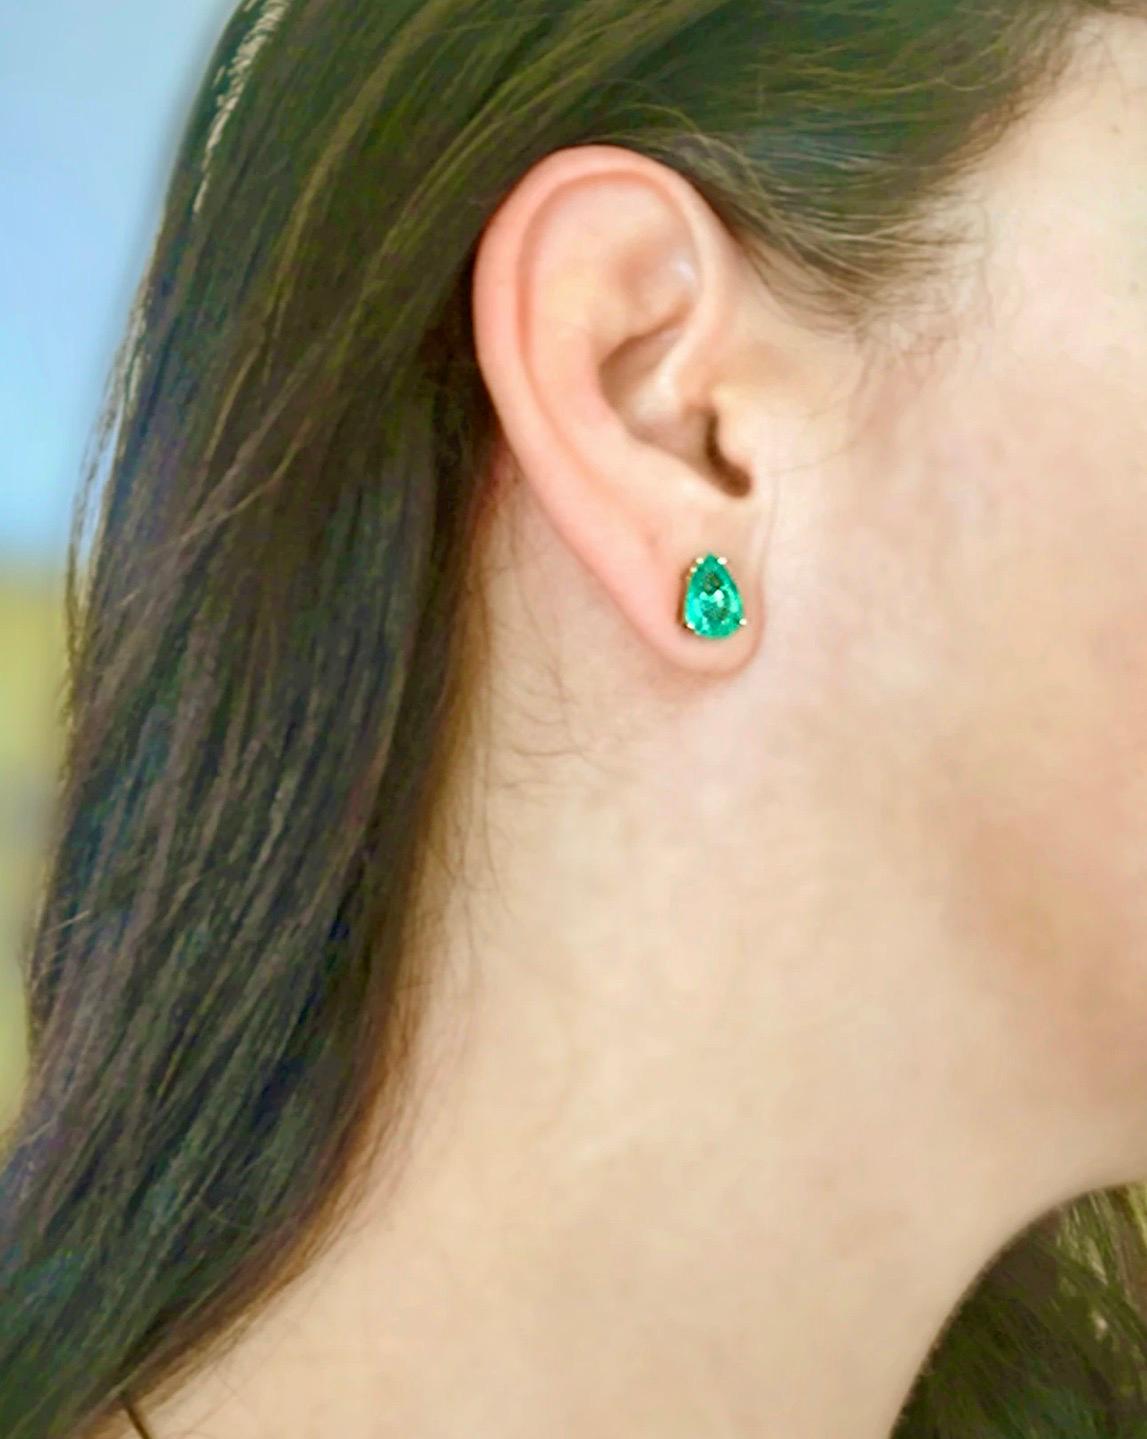 Natural Colombian Emeralds
Shape or Cut : Pear Cut
Average Color/Clarity : Beautiful Medium Green/ Clarity, SI
Total Weight Emeralds: 2.50 Carats (2 emeralds)
Second Stones: None
 Total Gemstones Weight: 2.50 carats
Earrings Measurement: 9.00mmx